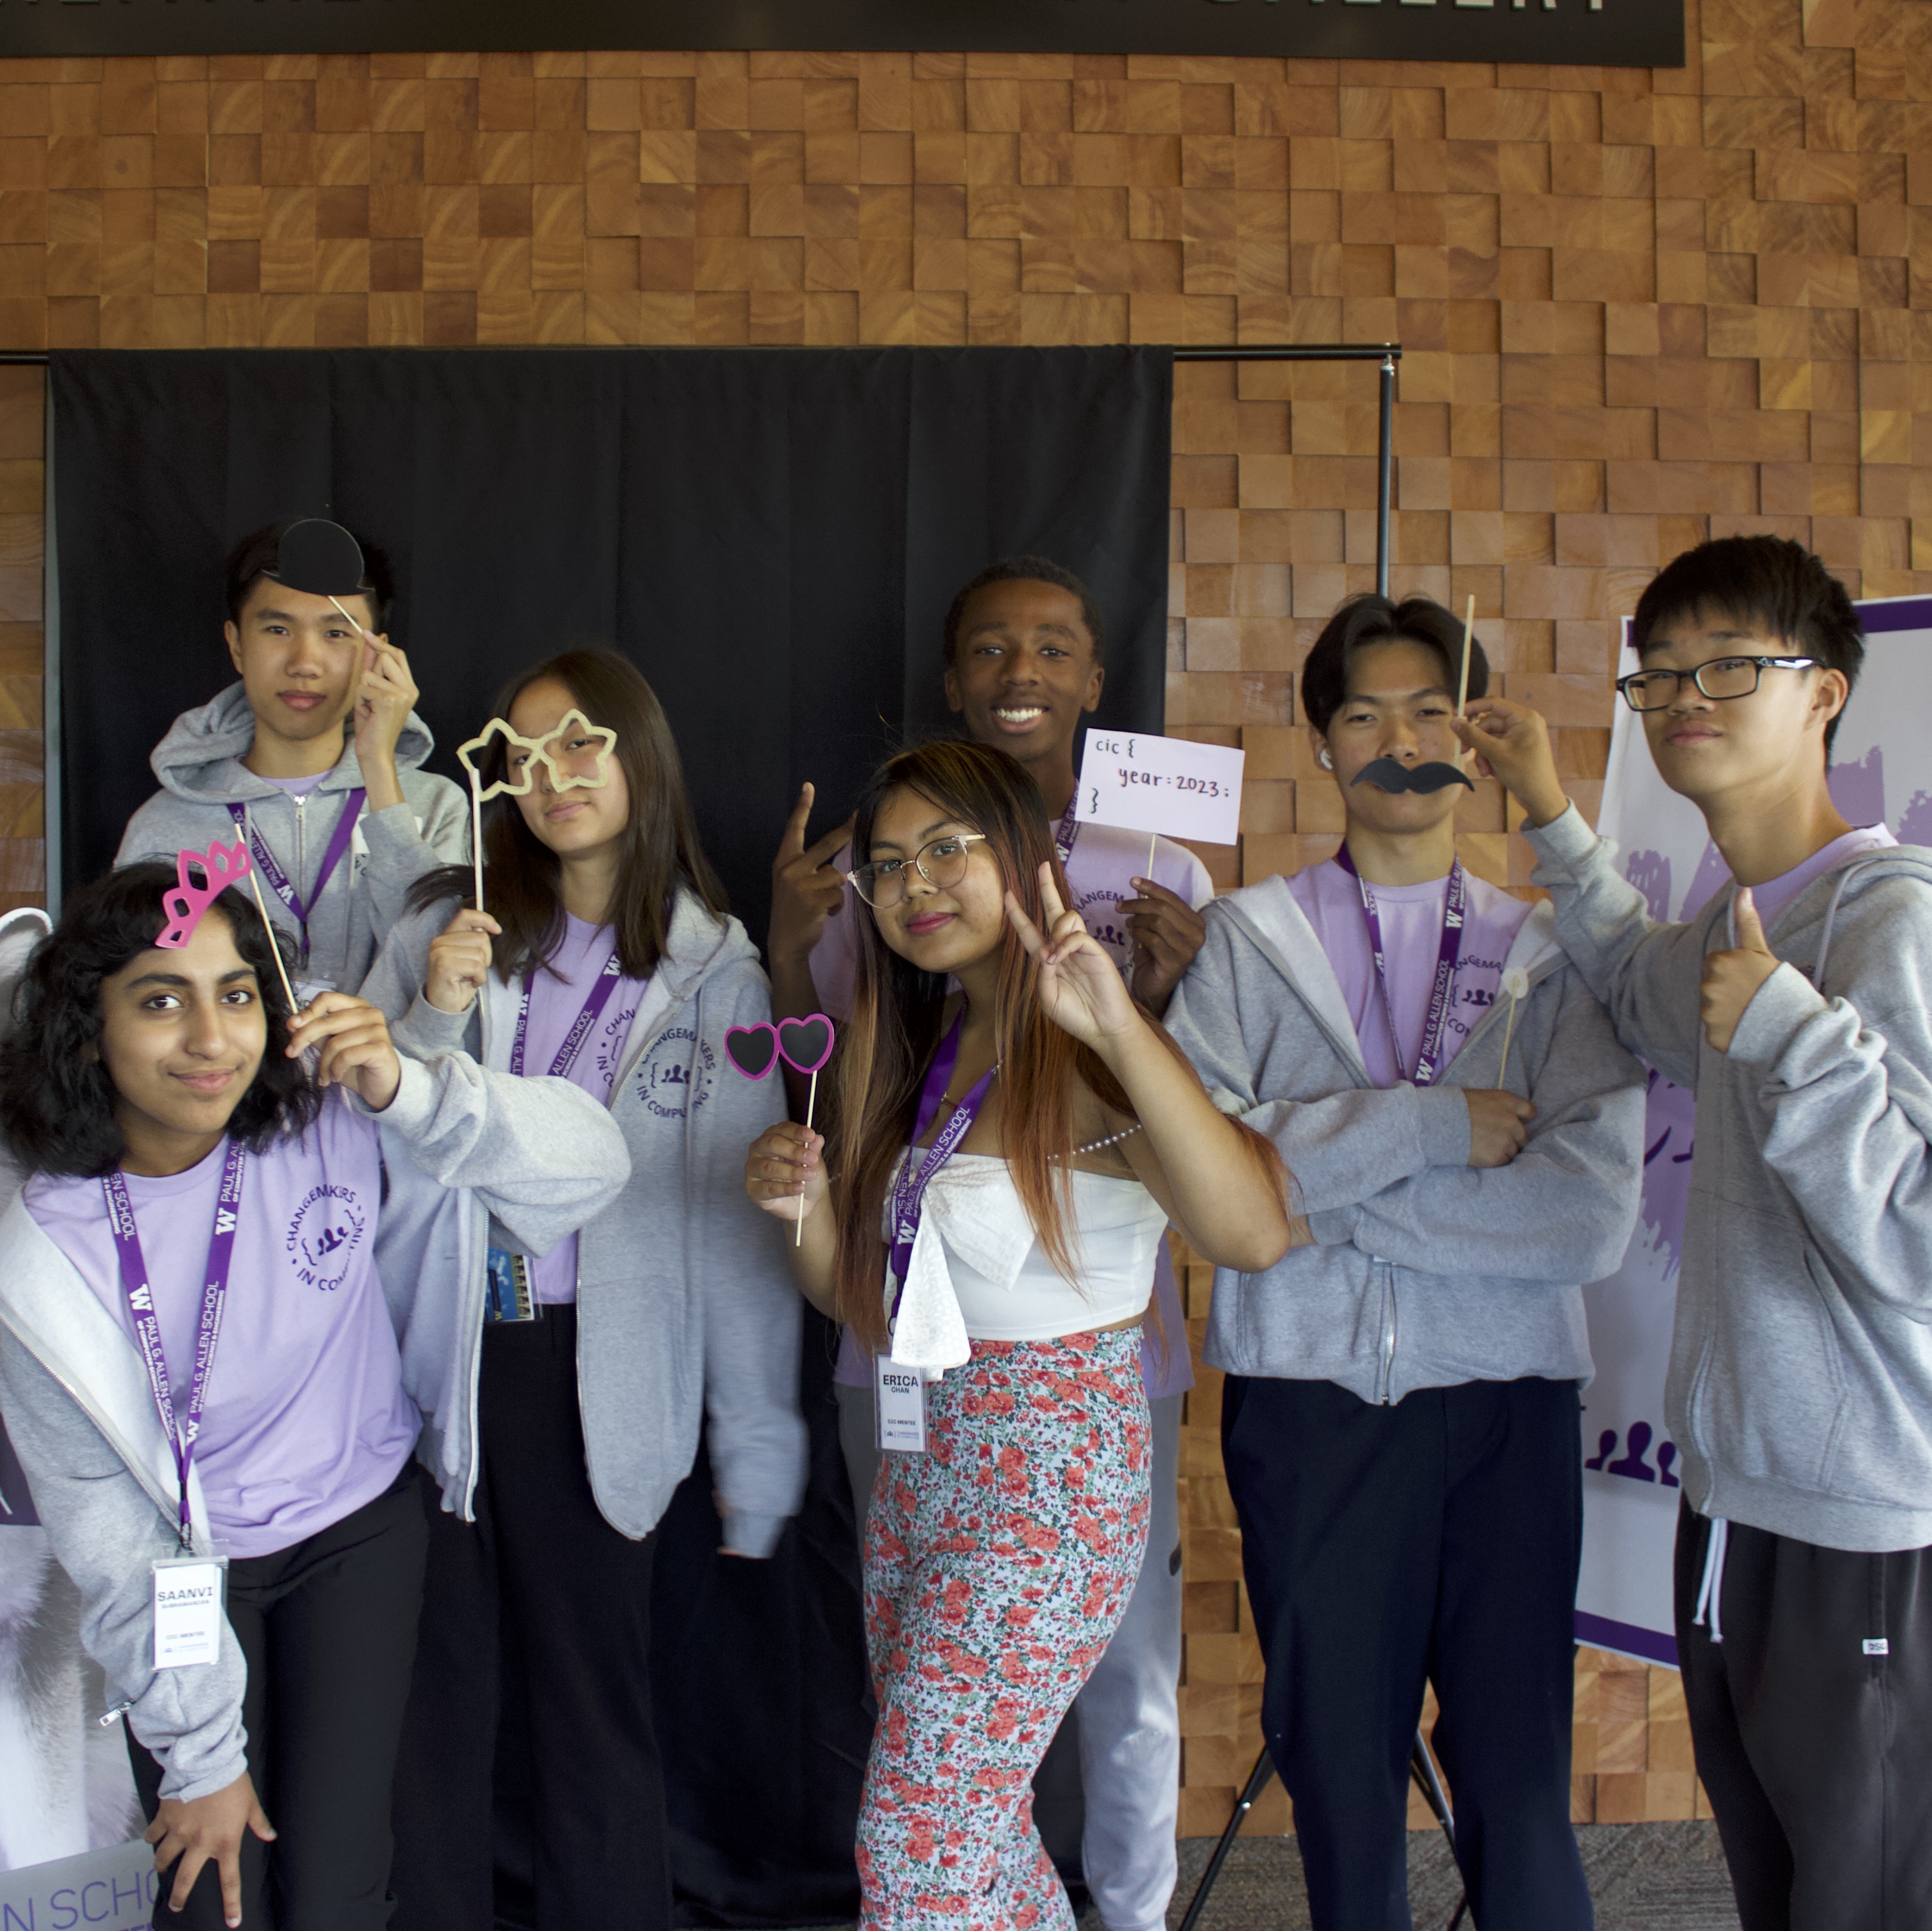 A group of 7 students some with photobooth props posing for the camera